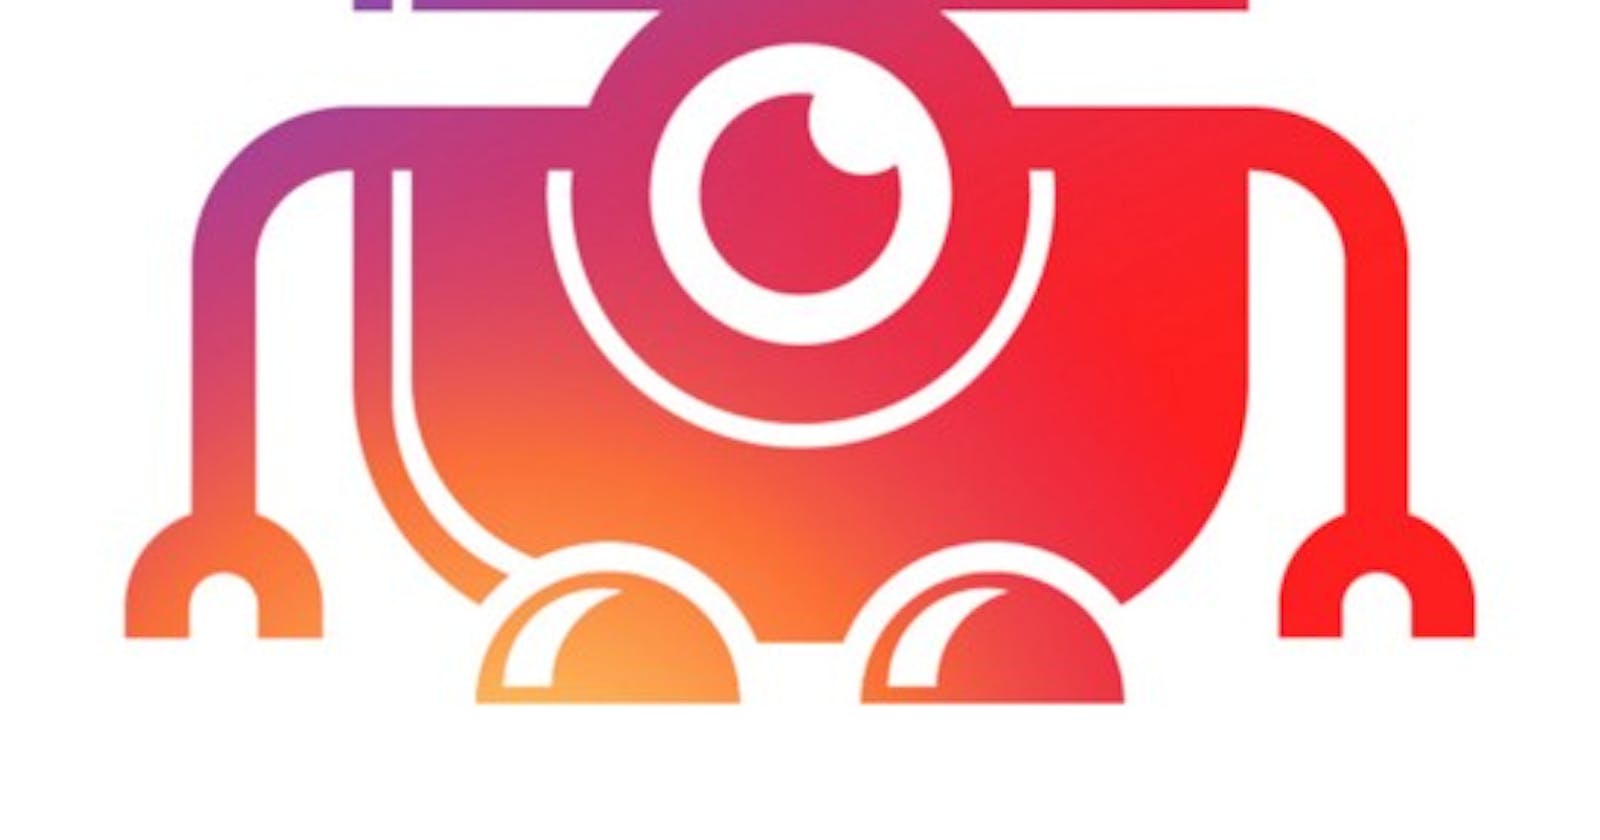 Create an Instagram bot that follows, likes, comments, and uploads images in 10 mins.